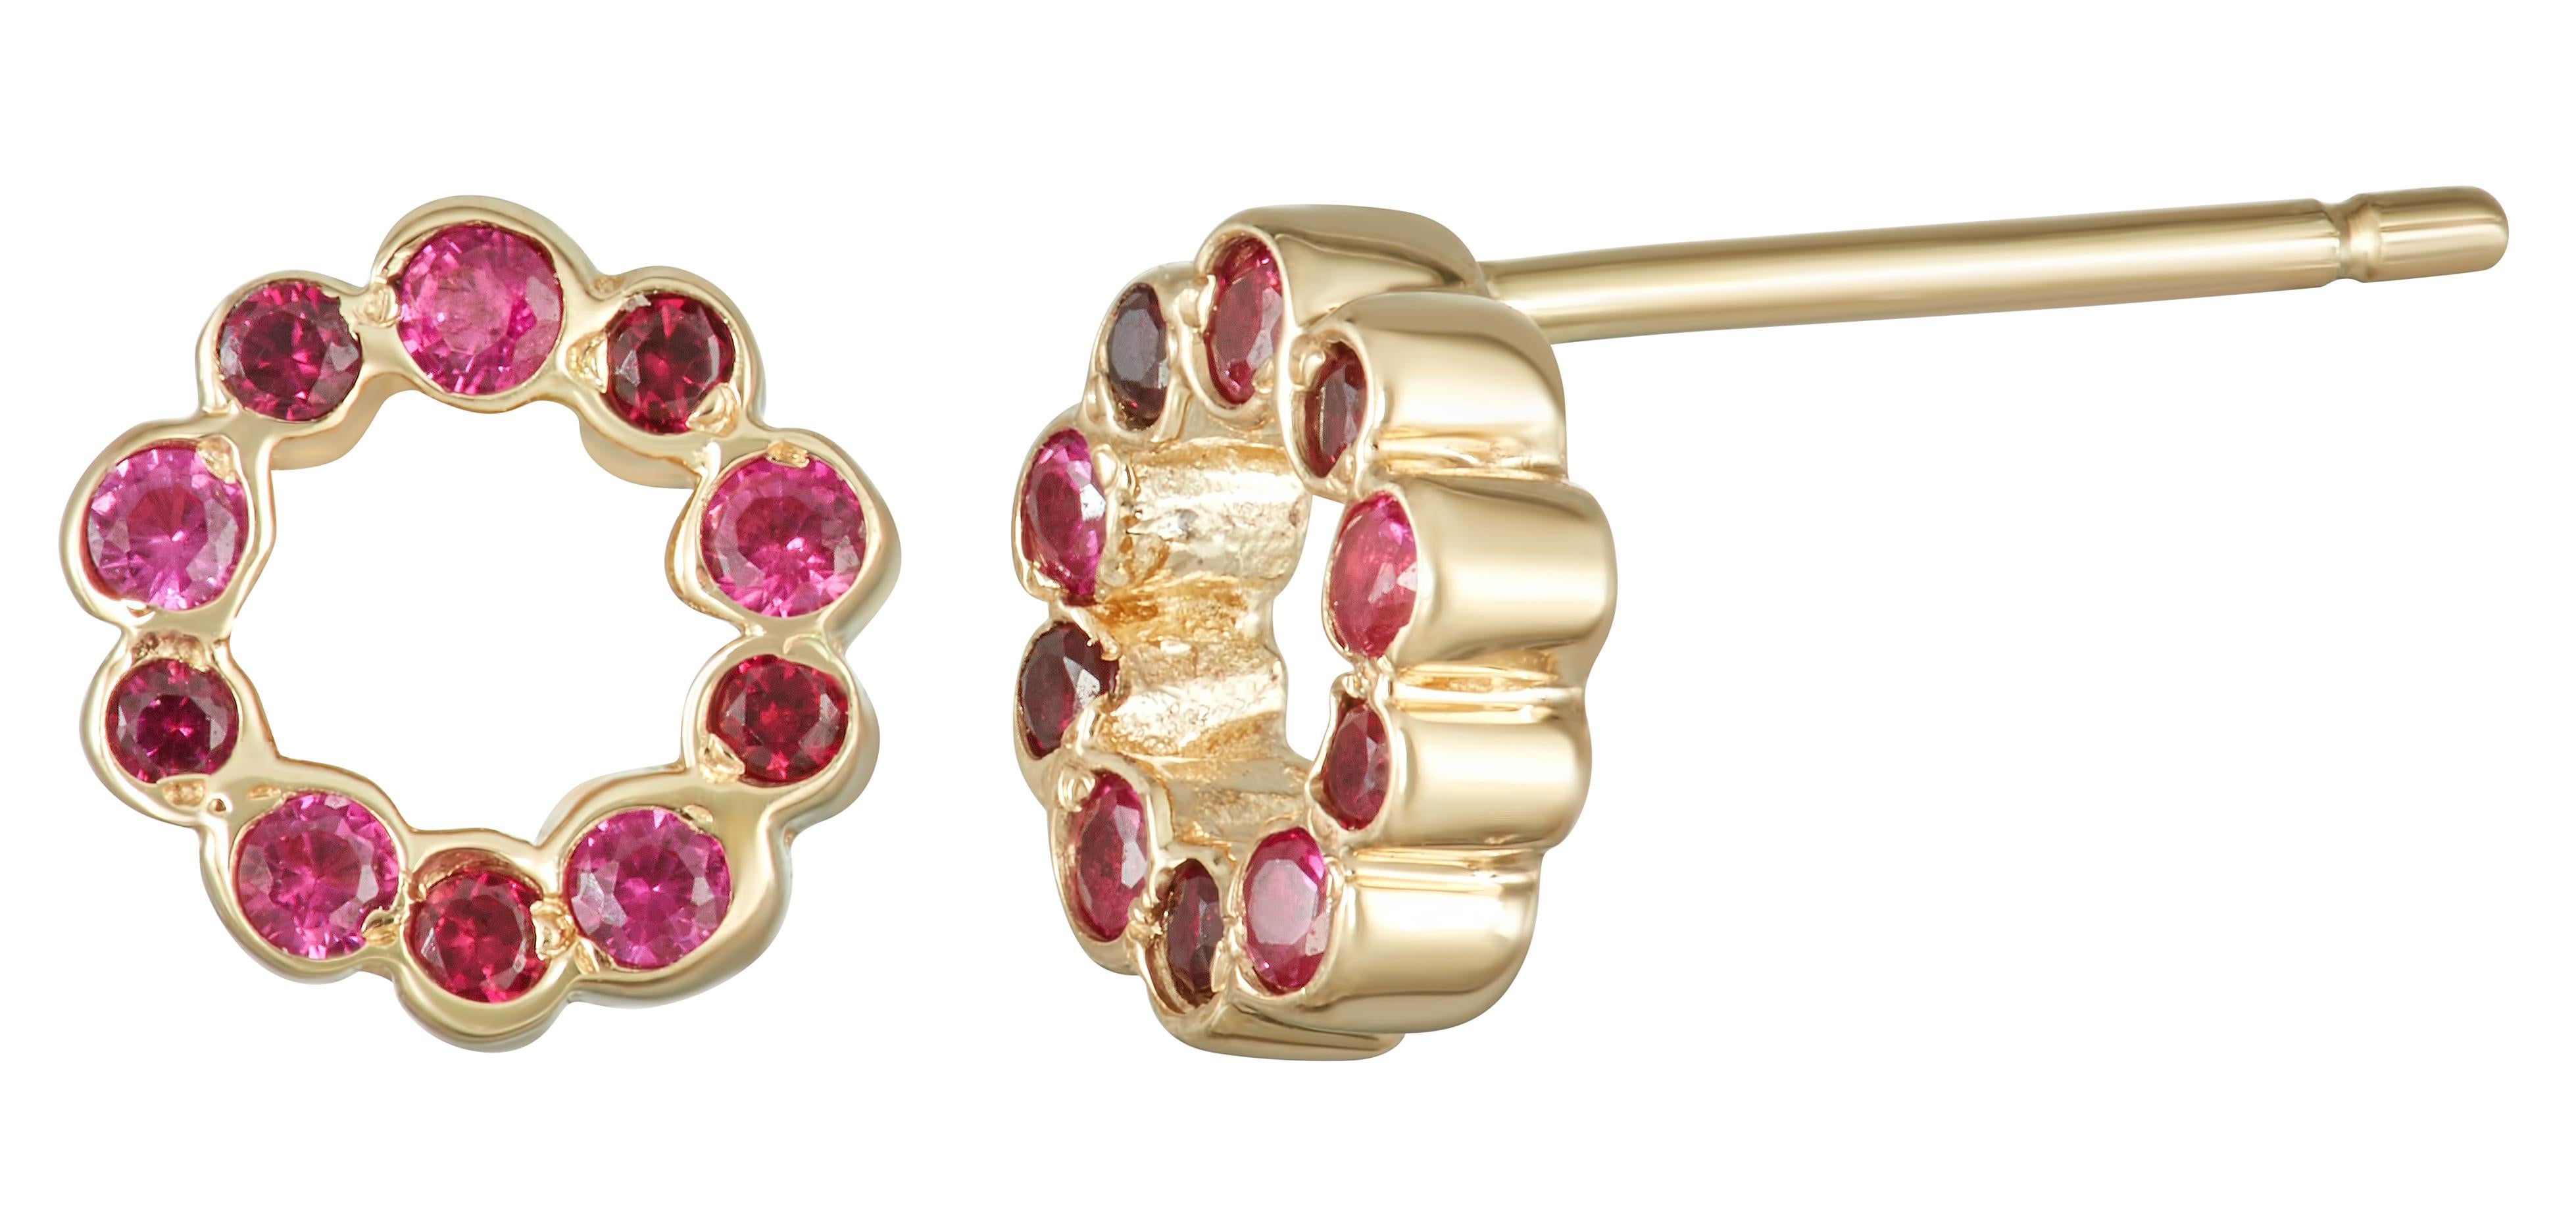 Contemporary Hi June Parker 14 Karat Yellow Gold Single Stud Earring with Rubies  For Sale